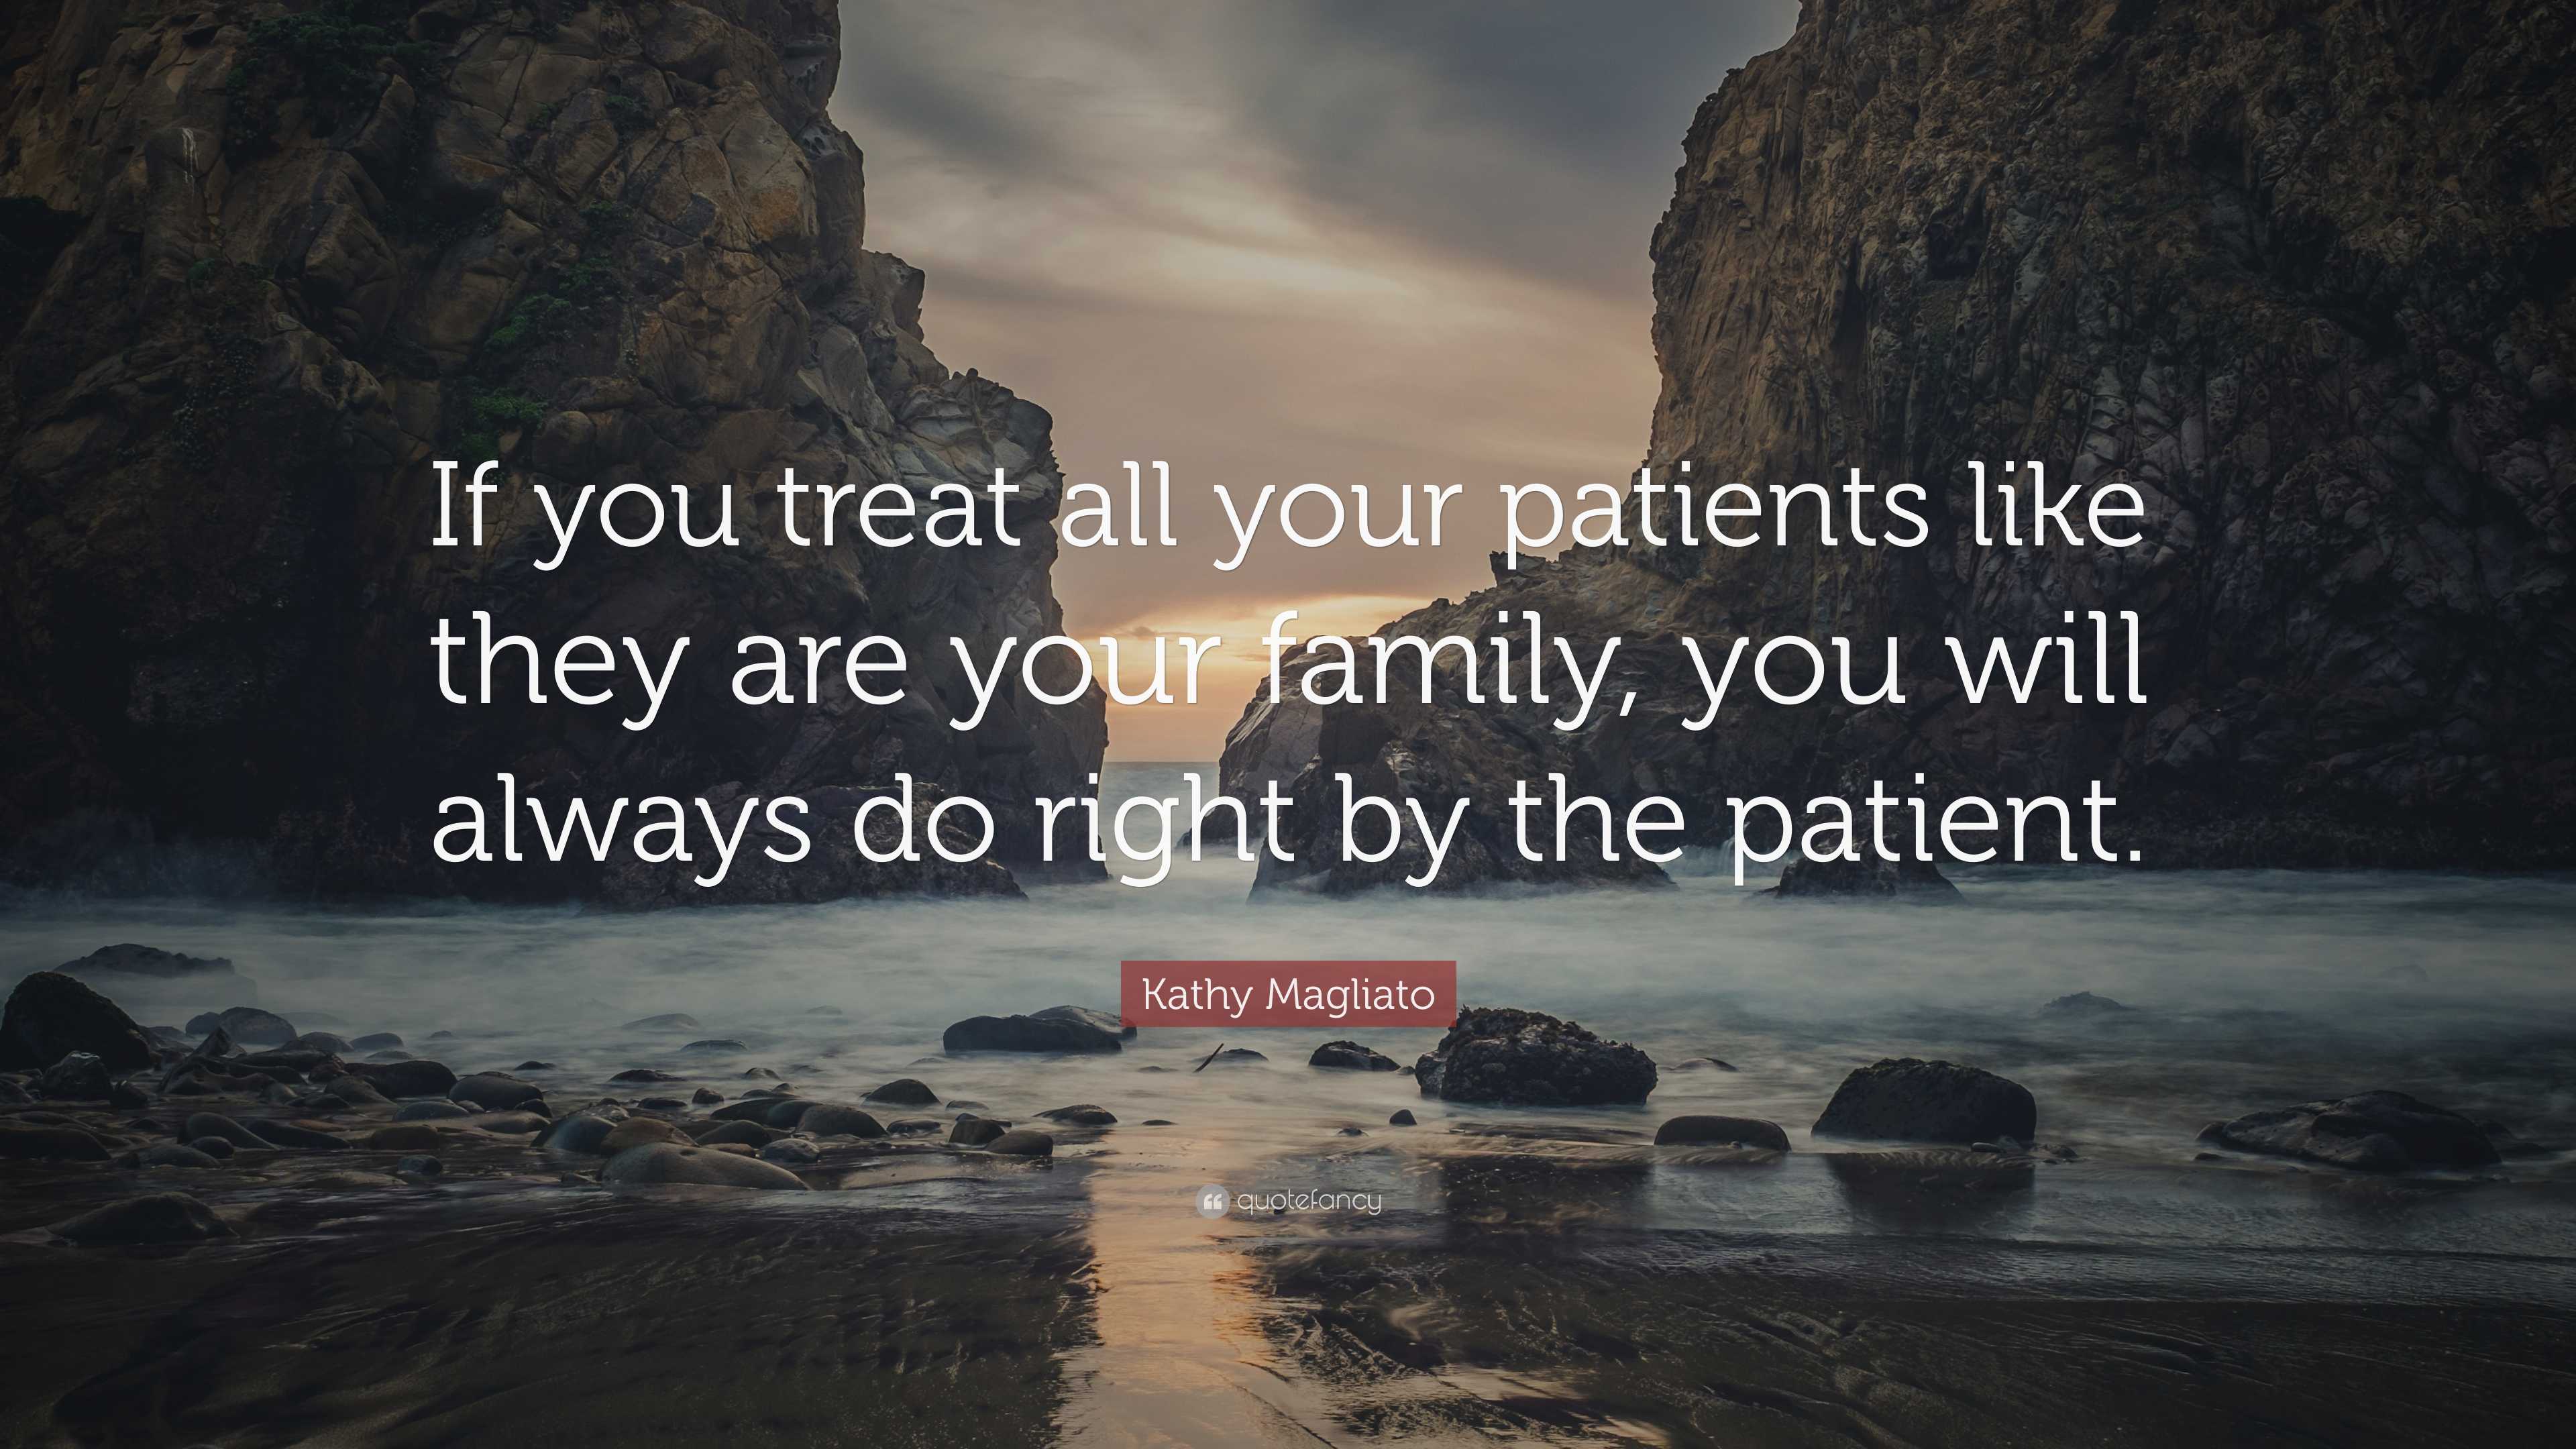 https://quotefancy.com/media/wallpaper/3840x2160/7740662-Kathy-Magliato-Quote-If-you-treat-all-your-patients-like-they-are.jpg